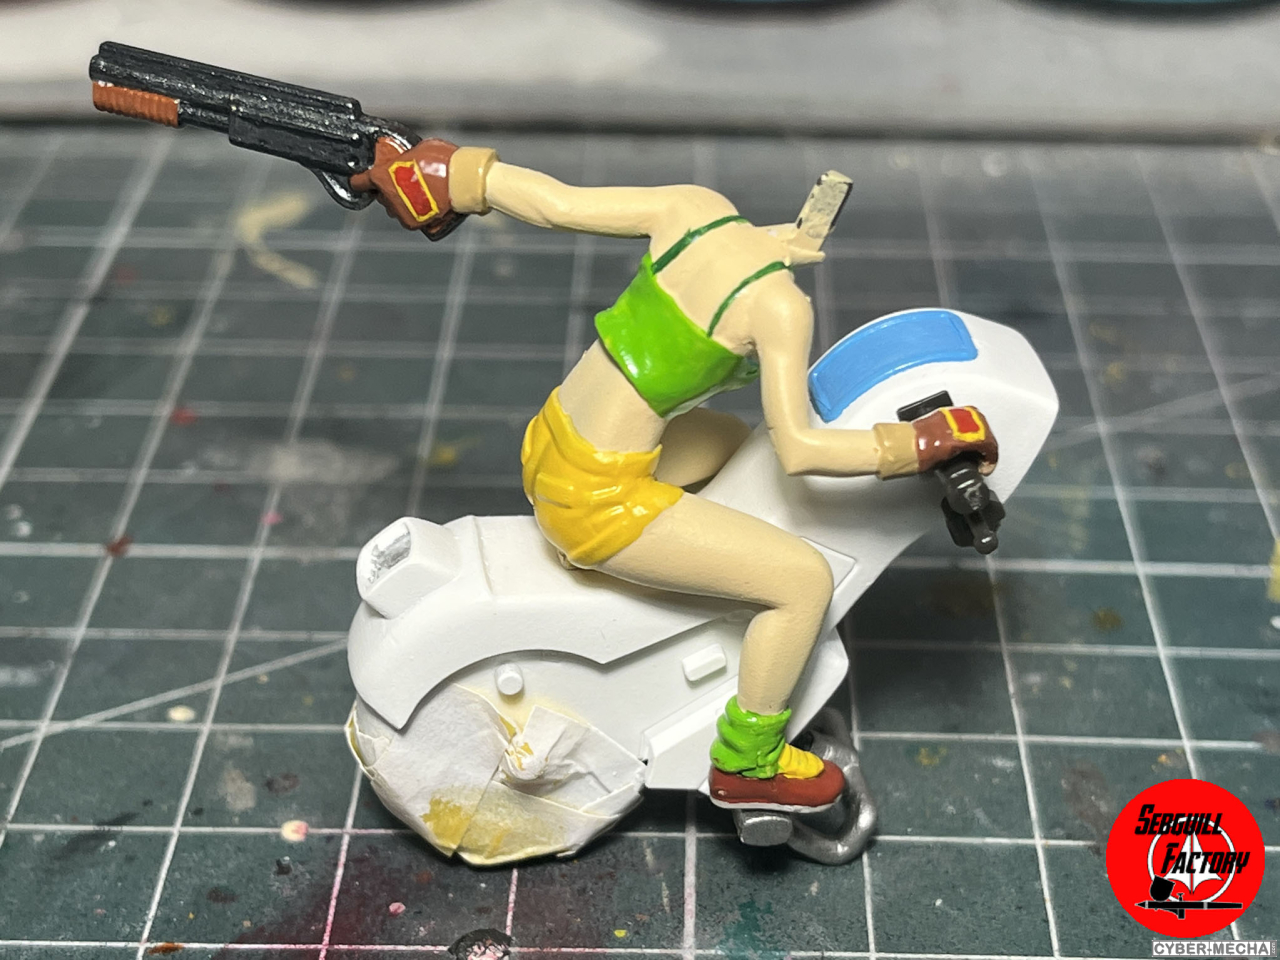 Dragon ball mecha collection 3 Lunch’s one wheel motorcycle 1677937626